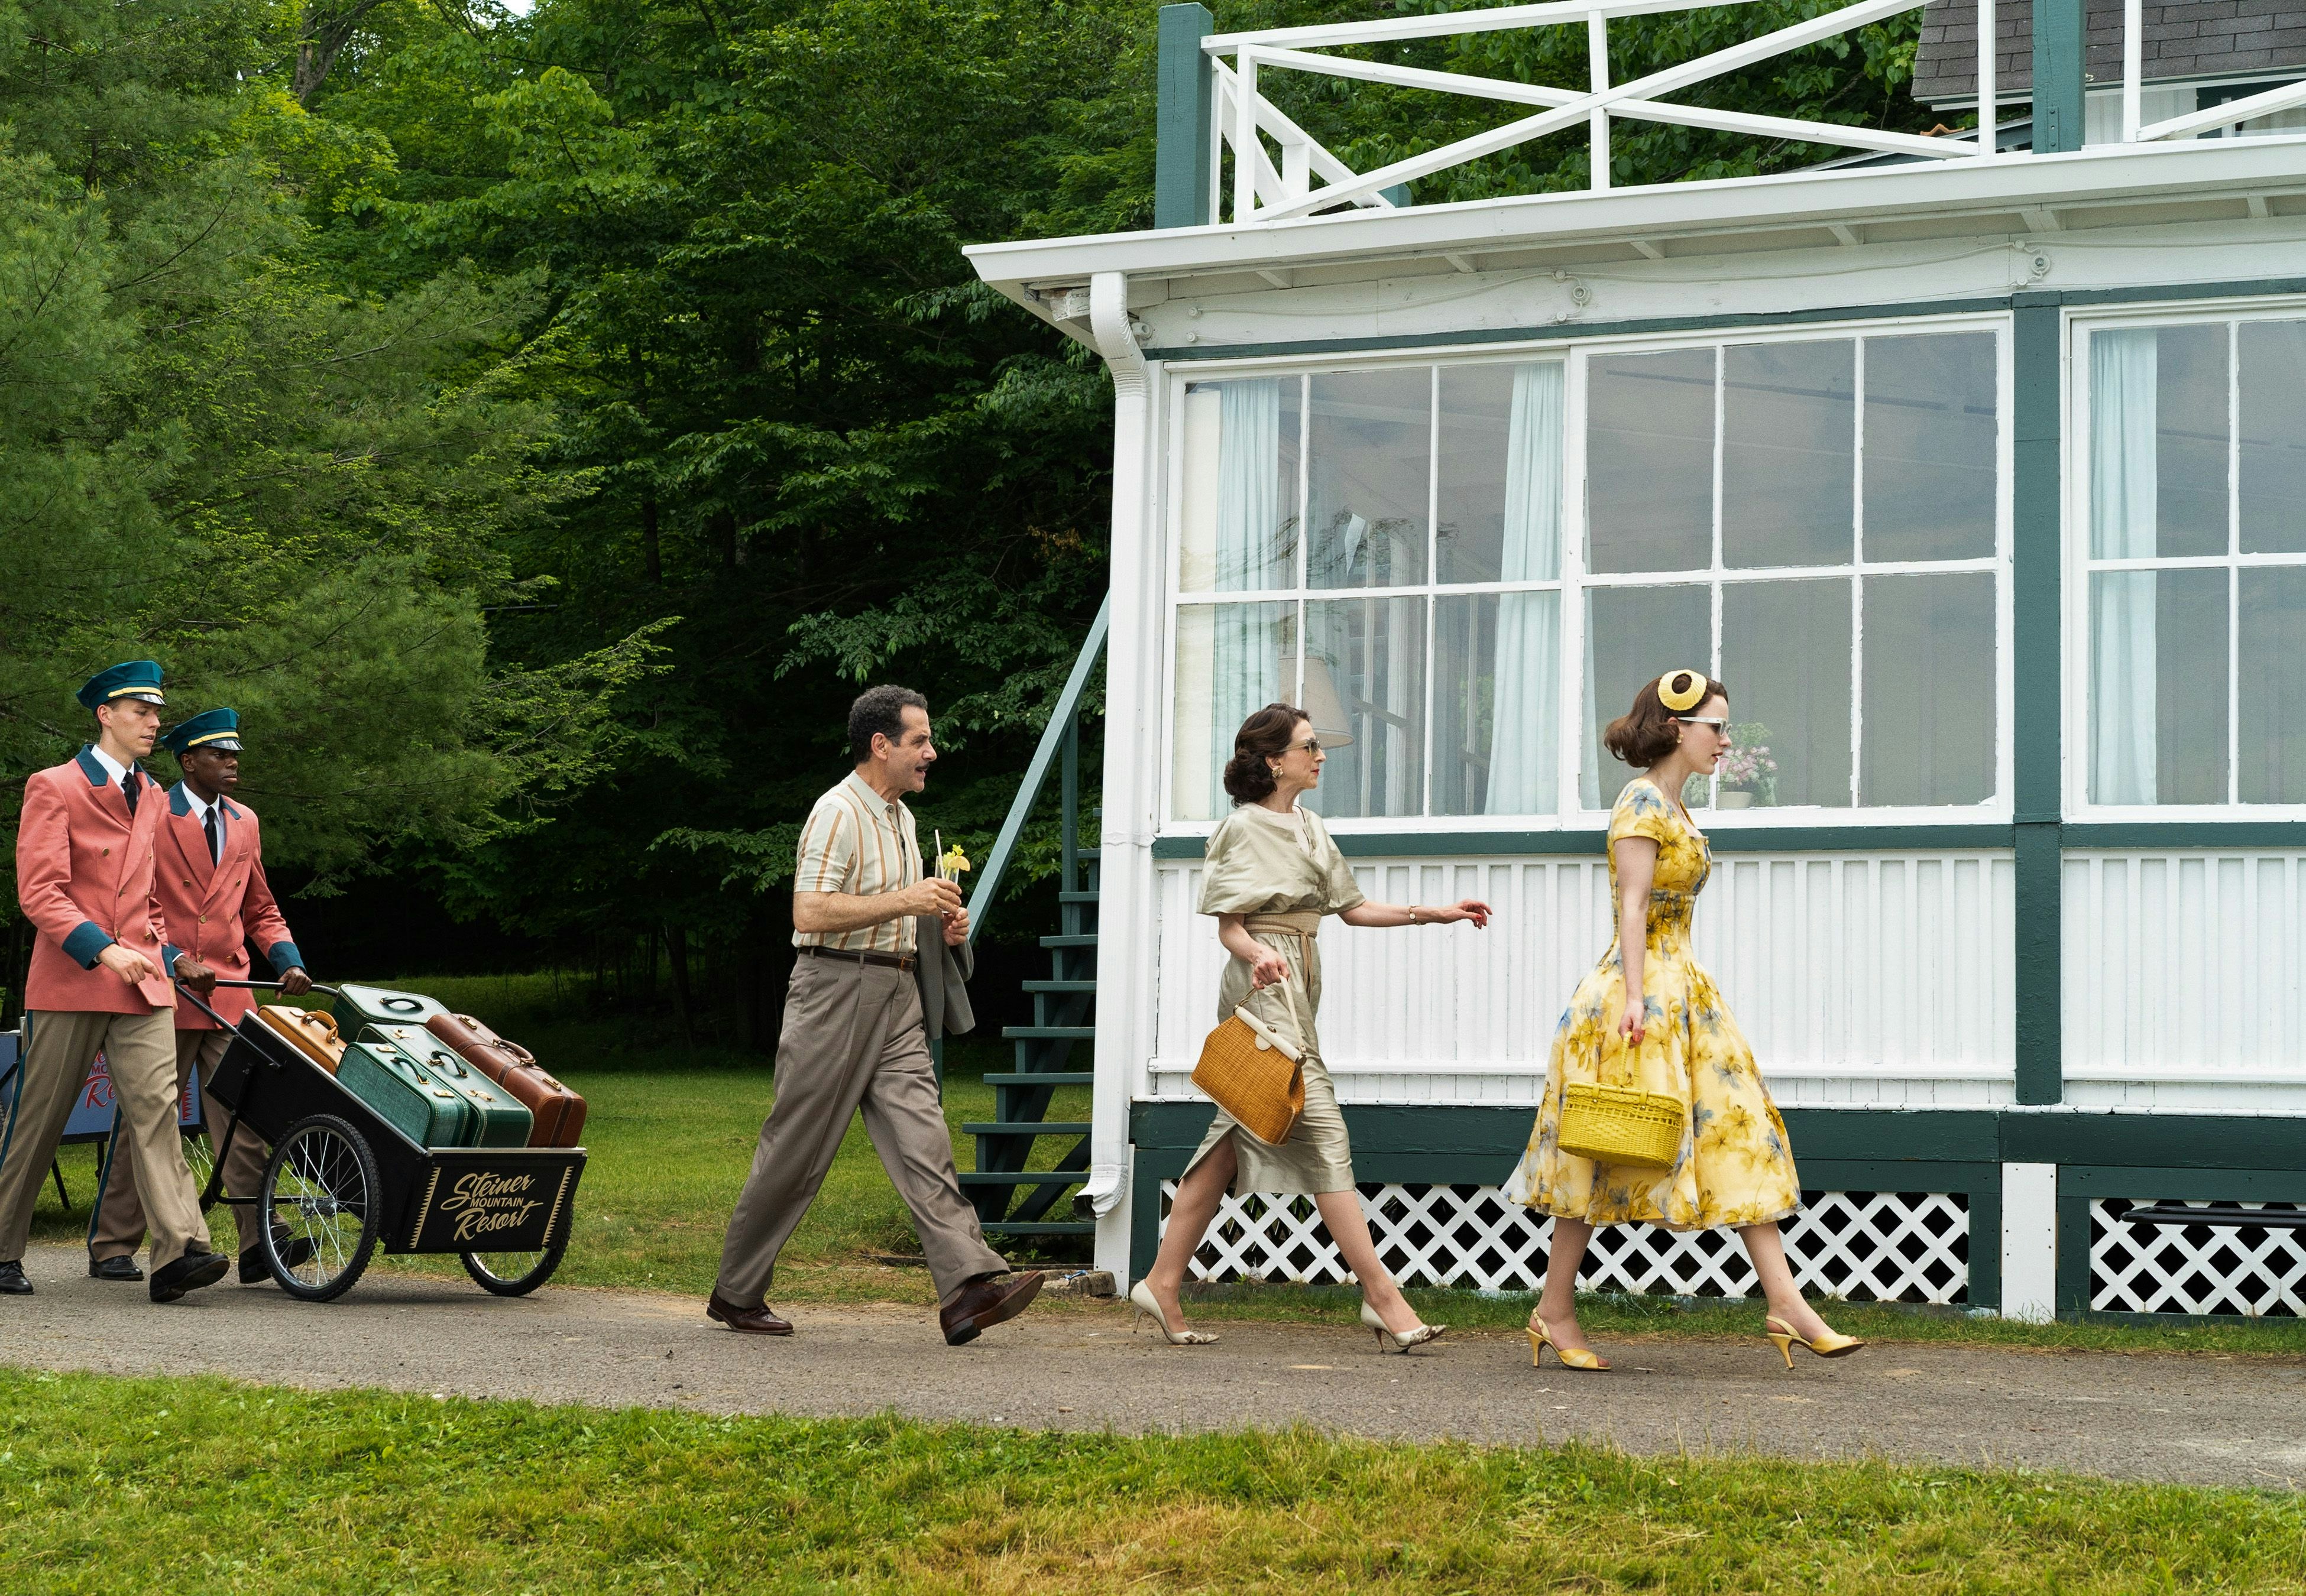 A still from season 2 of The Marvelous Mrs. Maisel, which shows Midge, her mother, and father walking single file in front of a white and forest green bungalow at a fictional Borscht Belt resort. Midge is wearing a yellow floral dress with matching shoes, handbag, and hat. Her mother is in a dove grey silk with matching shoes and a brown handbag. Her father is in dark khaki slacks and a neutral buttondown. They are followed by two porters in pink uniform coats and black hats pushing luggage in a black cart